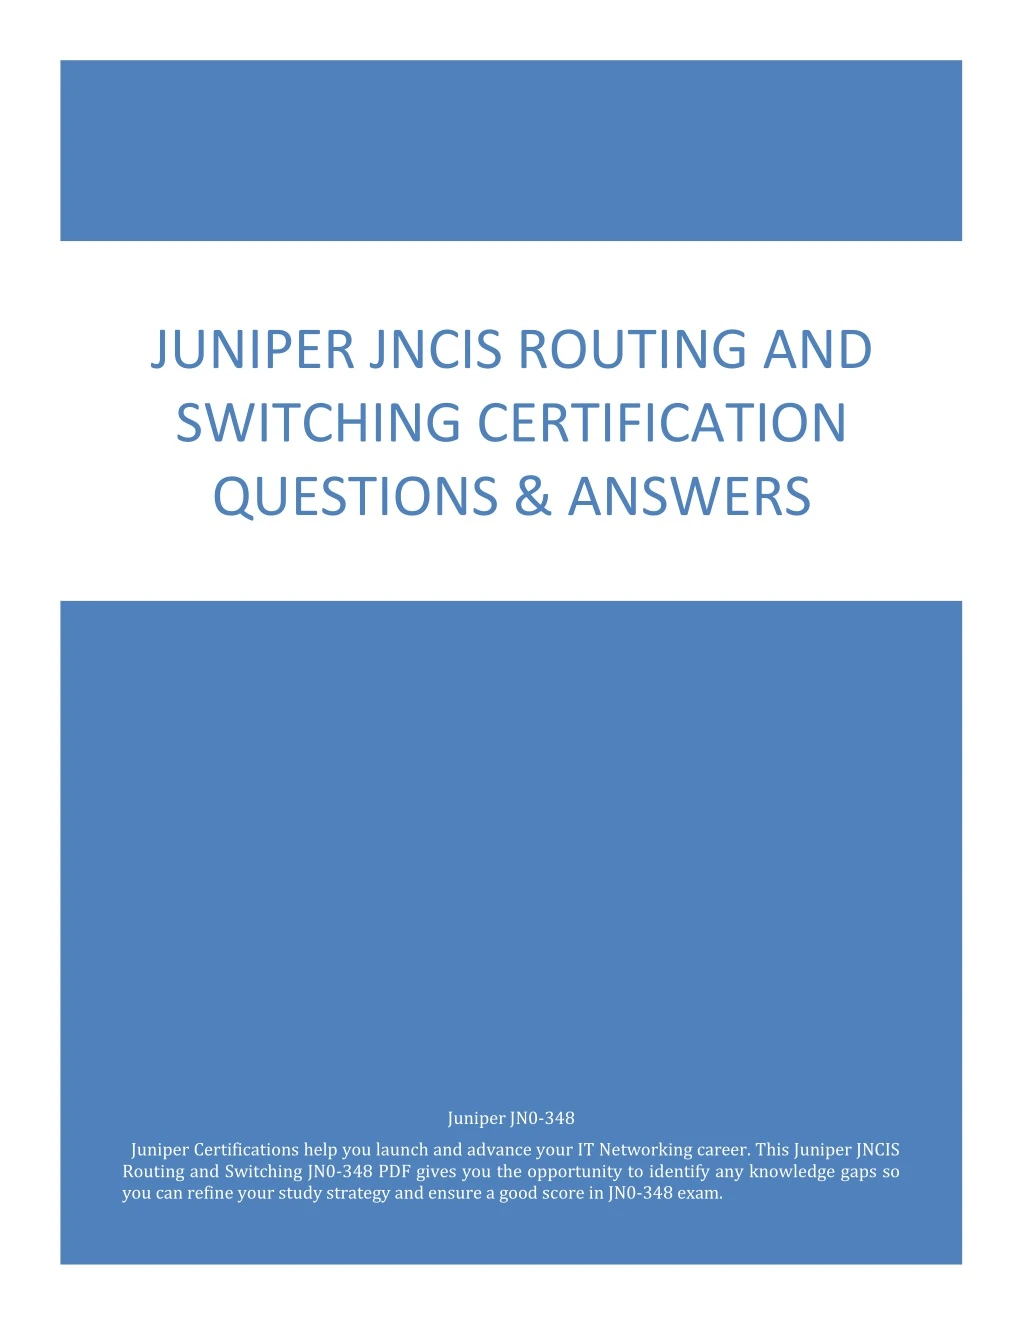 juniper jncis routing and switching certification